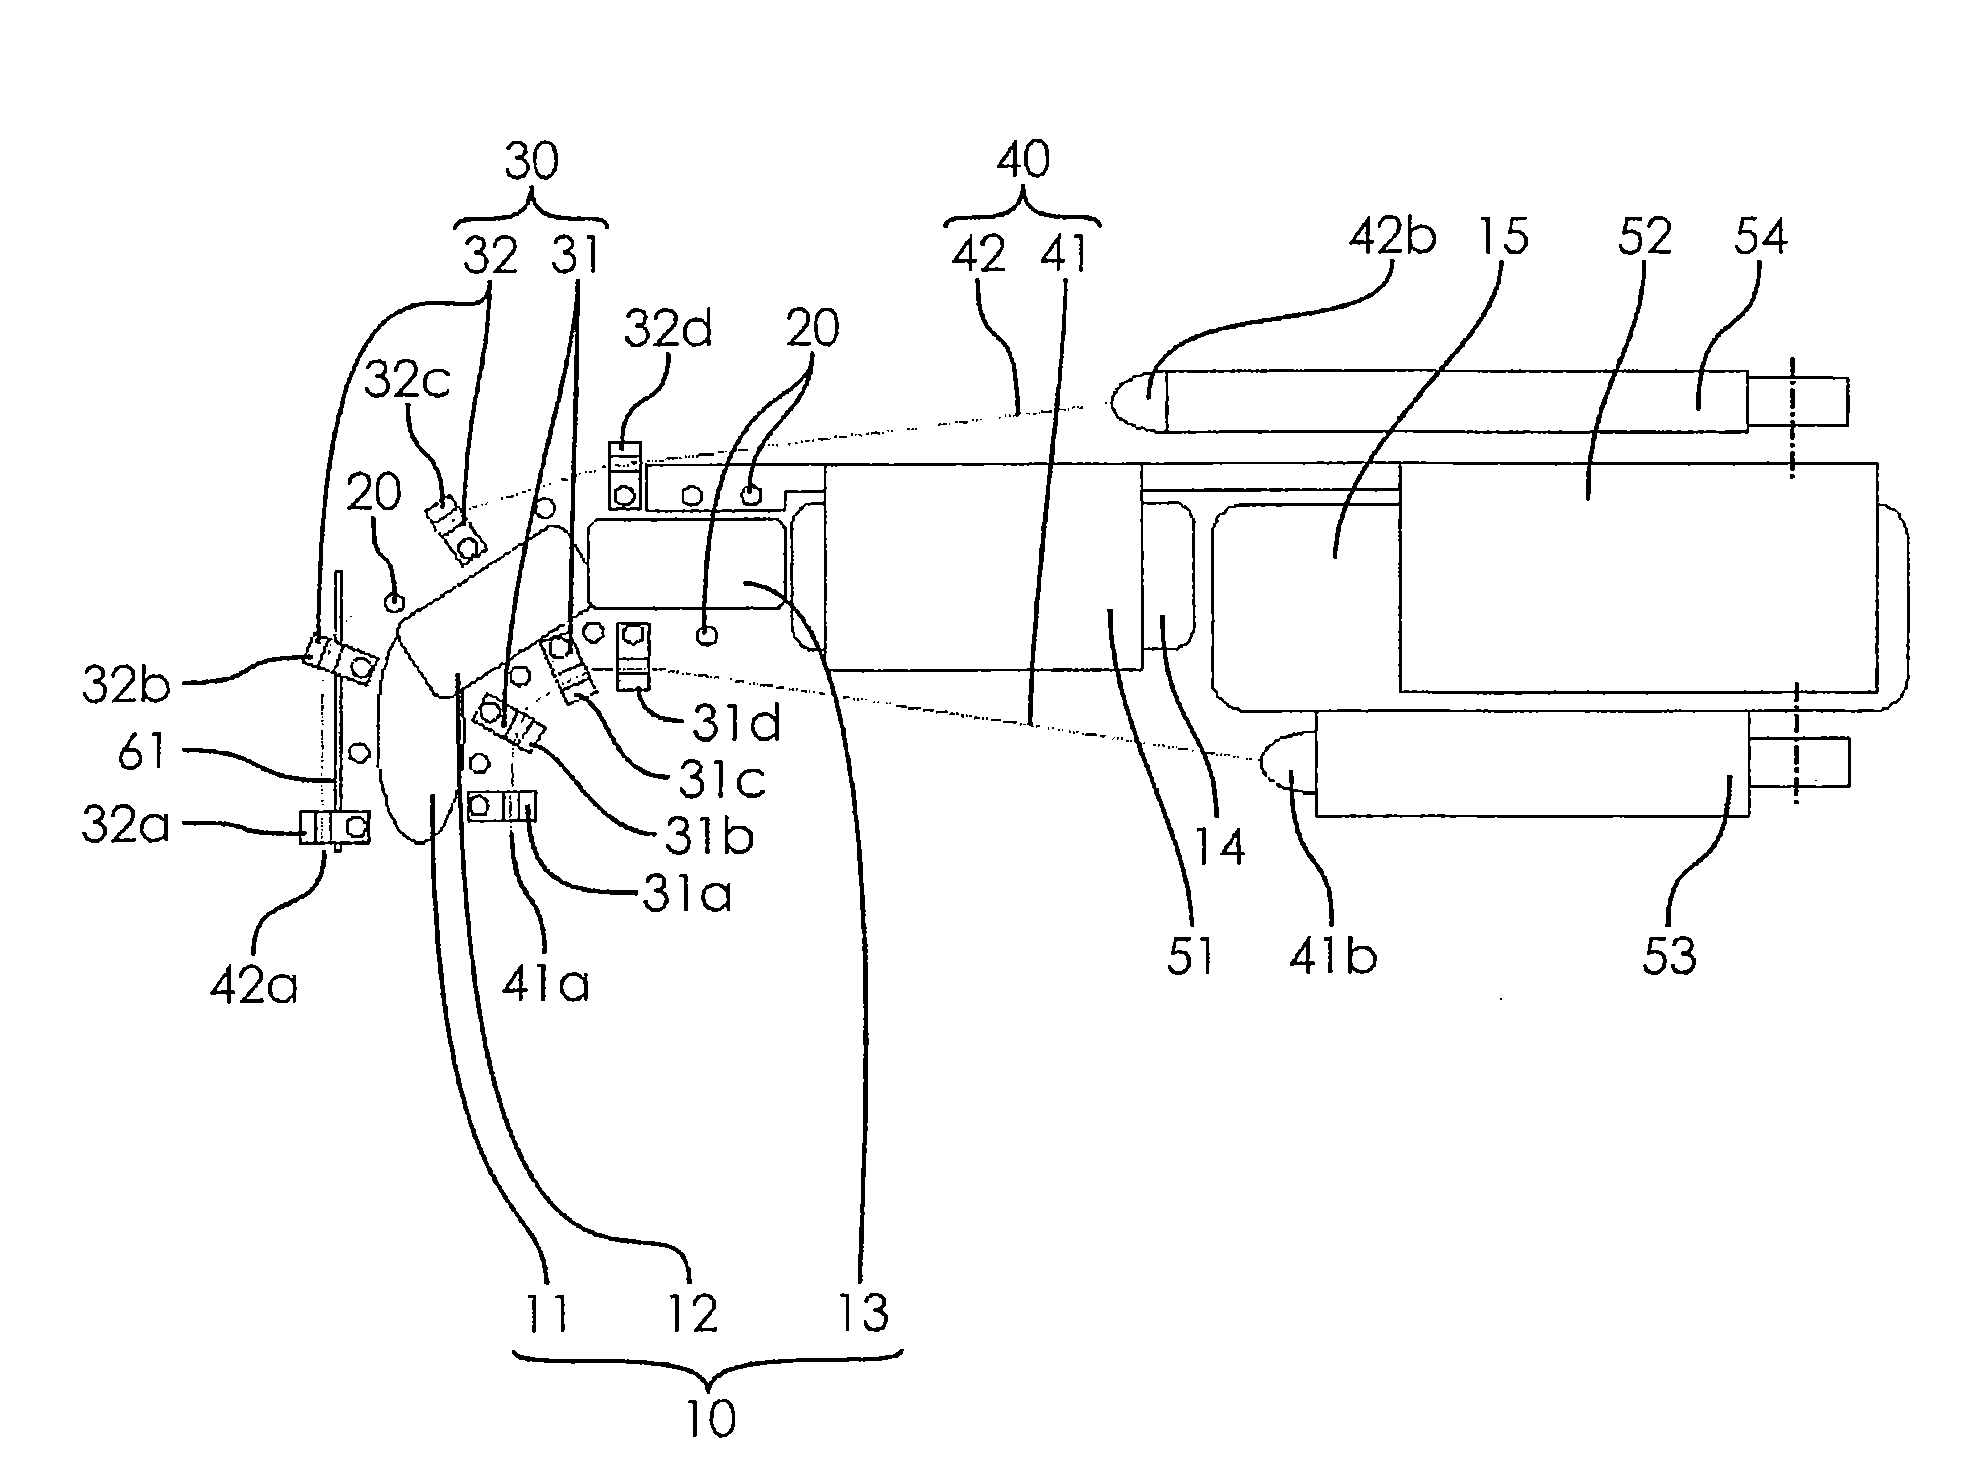 Finger motion assisting apparatus